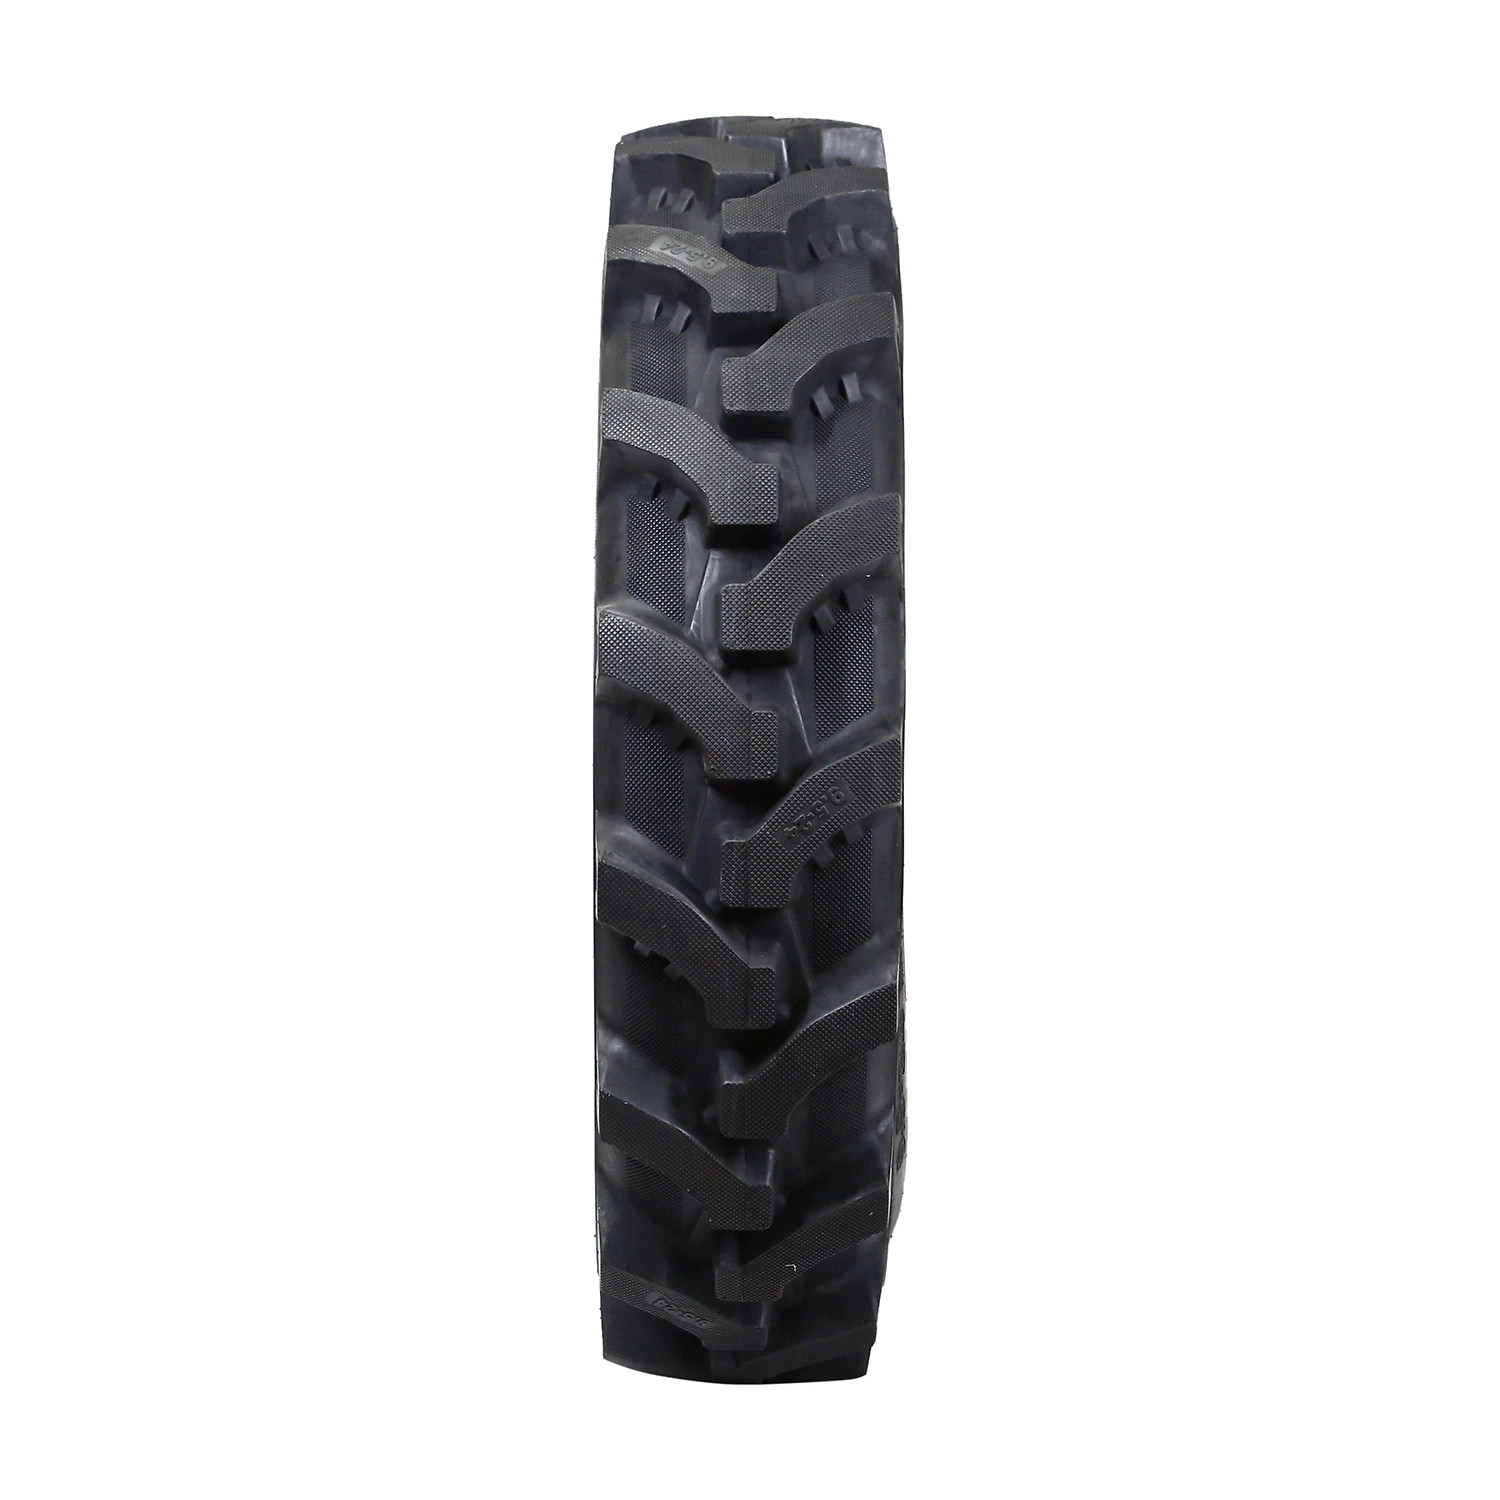 Szie 9.5-28-10pr R2 Pattern Agriocultural Farm Tire Used for Tractor